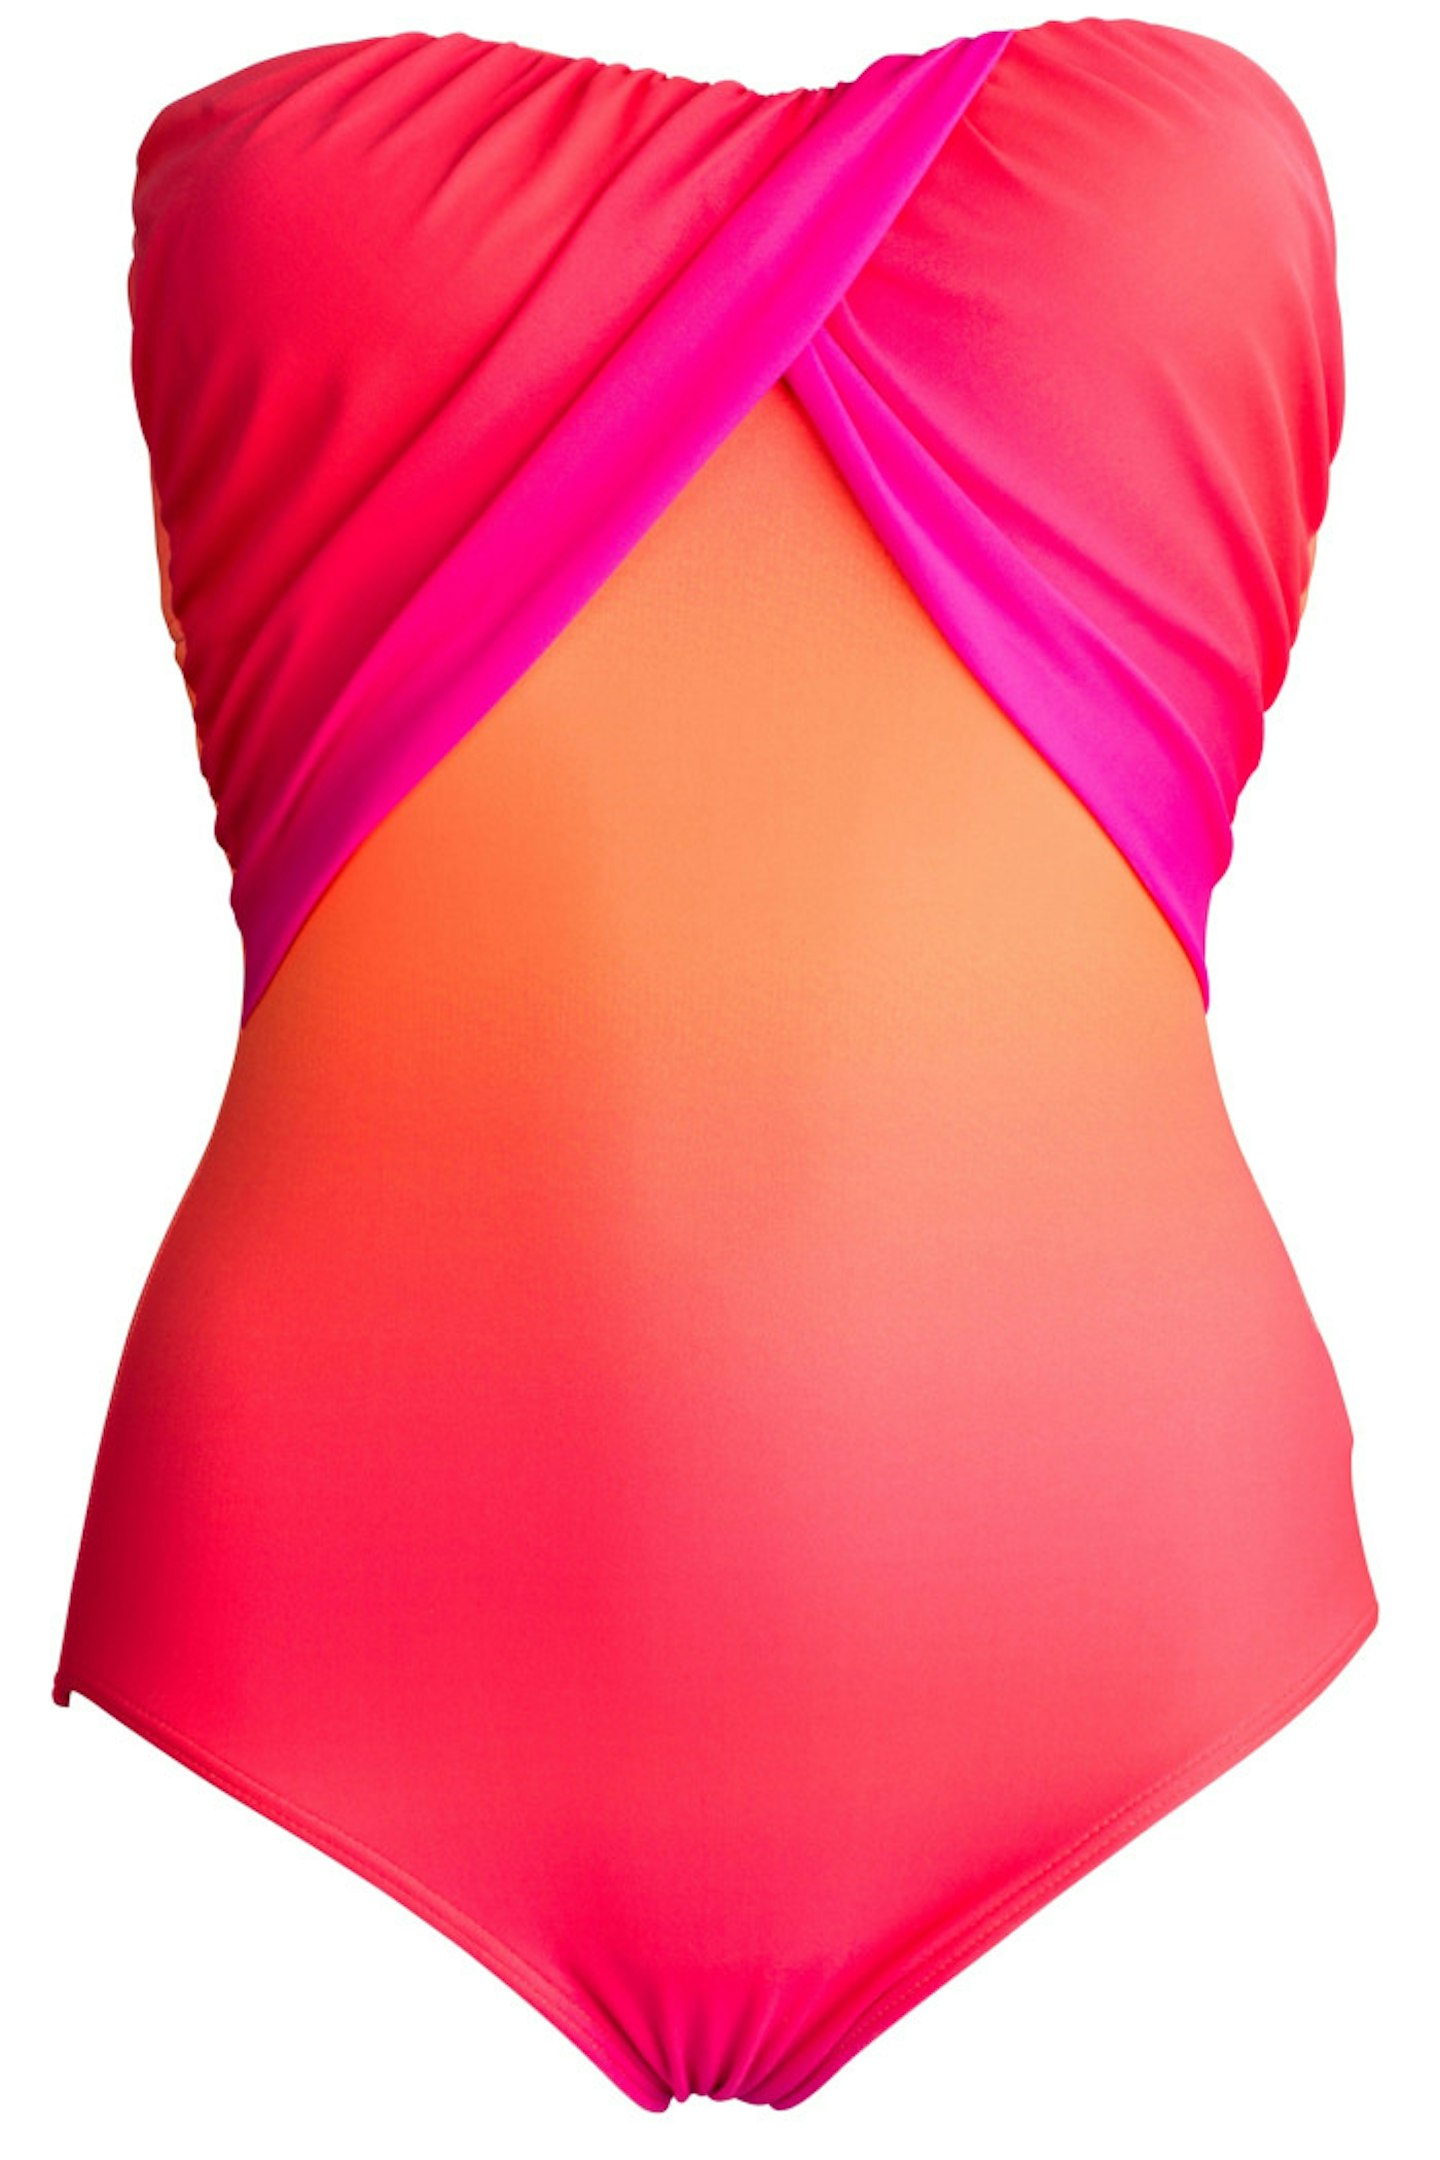 cocobay £94 httpwww.cocobay.co.ukswimwearwomen-swimsuits-and-tankinisseafolly-miami-neon-melon-maillot.html